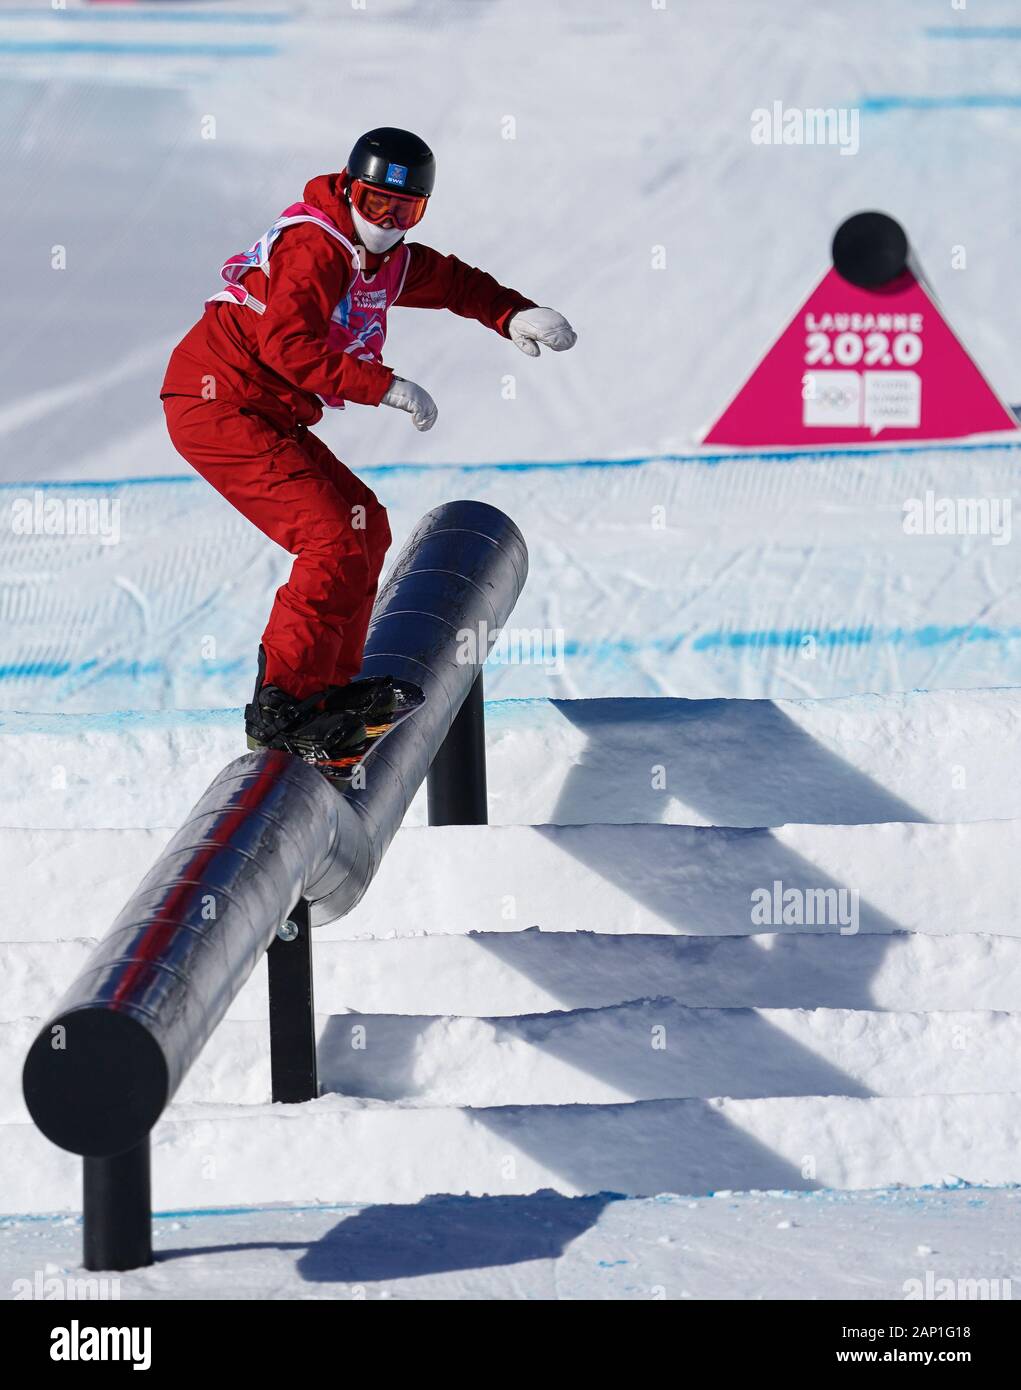 Leysin, Switzerland. 20th Jan, 2020. William Mathisen of Sweden competes  during the Men's Slopestyle final of Snowboard at the 3rd Winter Youth  Olympic Games in Leysin, Switzerland, Jan. 20, 2020. Credit: Lu